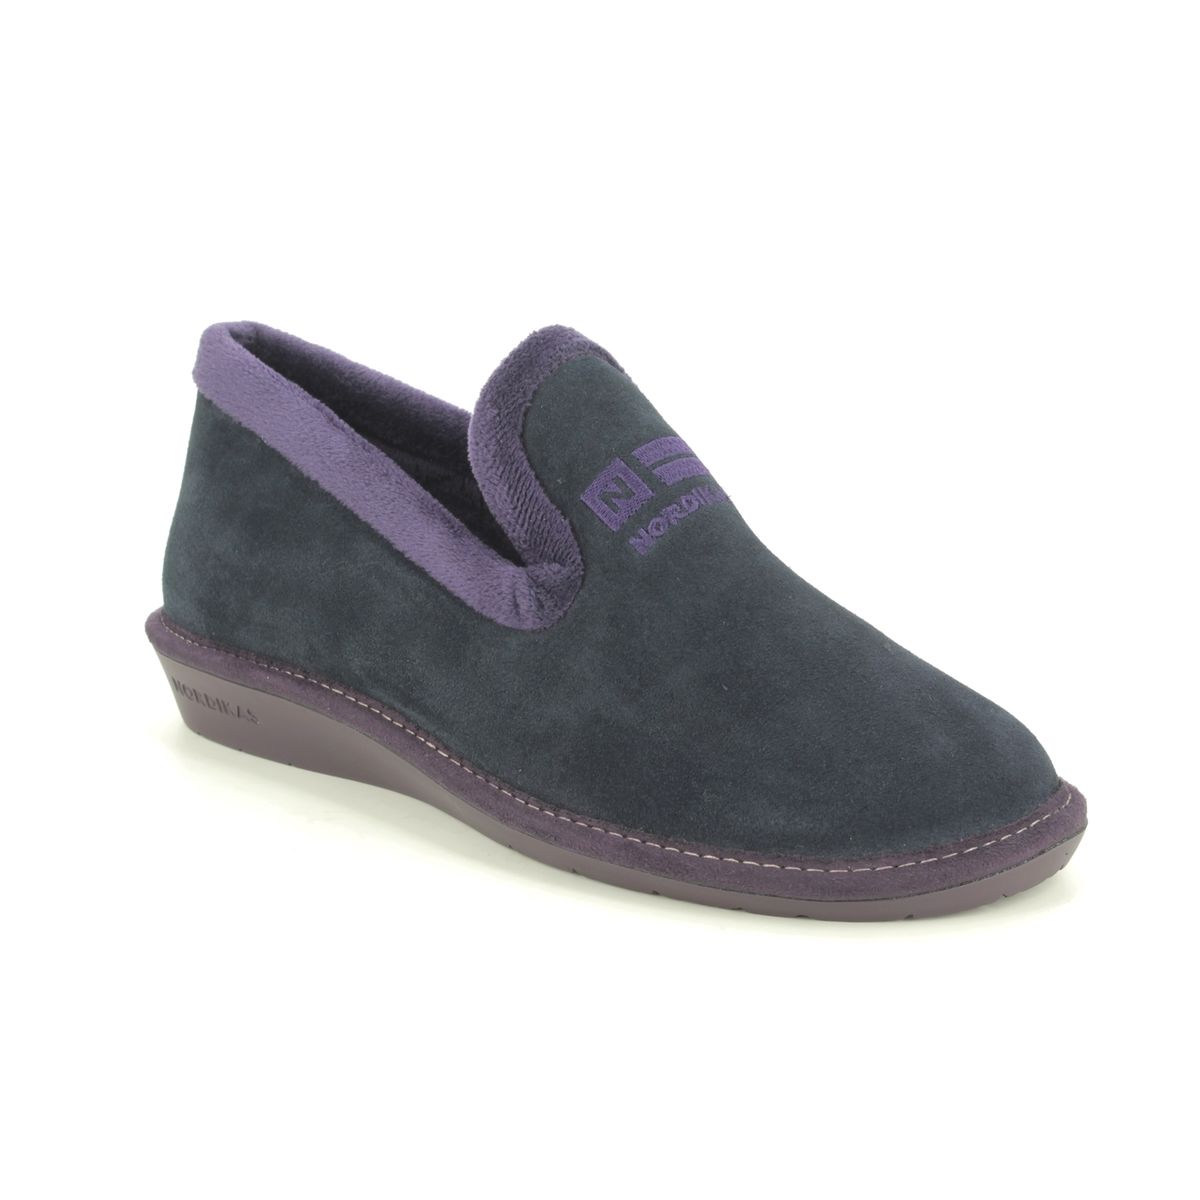 Nordikas Tabackin Navy Suede Womens Slippers 305-4   Nicola 3 In Size 38 In Plain Navy Suede